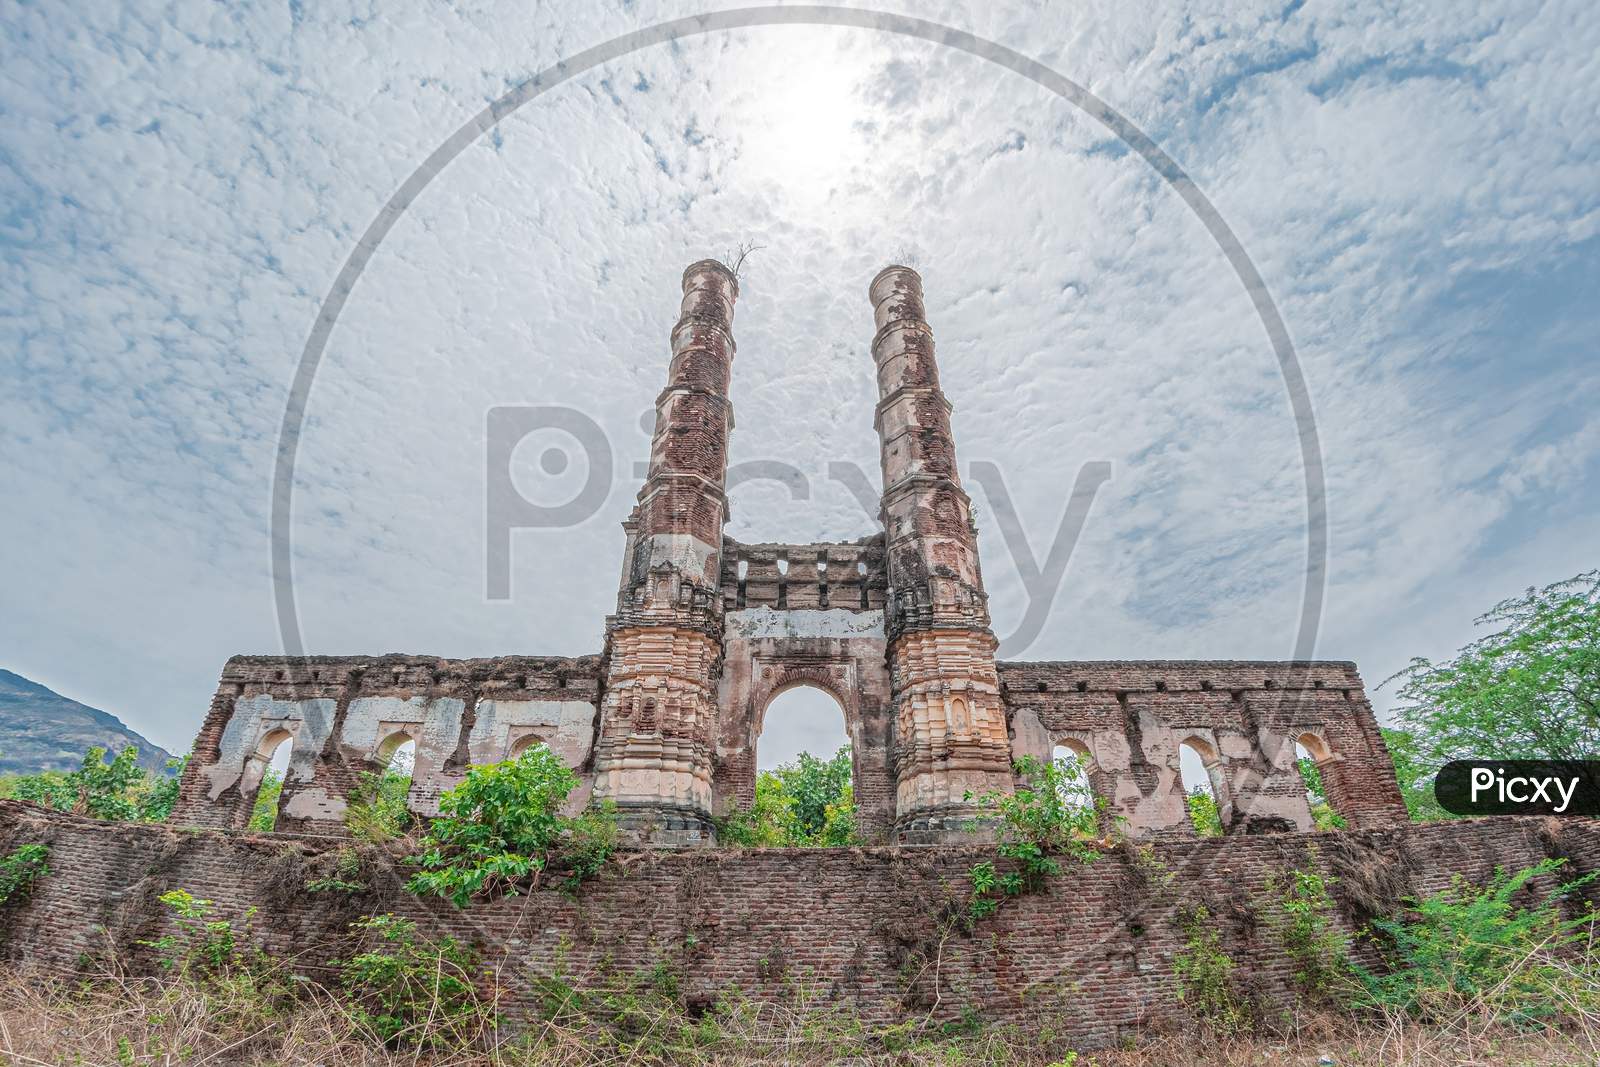 Heritage Iteri Masjid of Champaner also known as Amir manzil( brick tomb). Champaner-Pavagadh Archaeological Park, a UNESCO World Heritage Site, is located in Panchmahal district in Gujarat, India